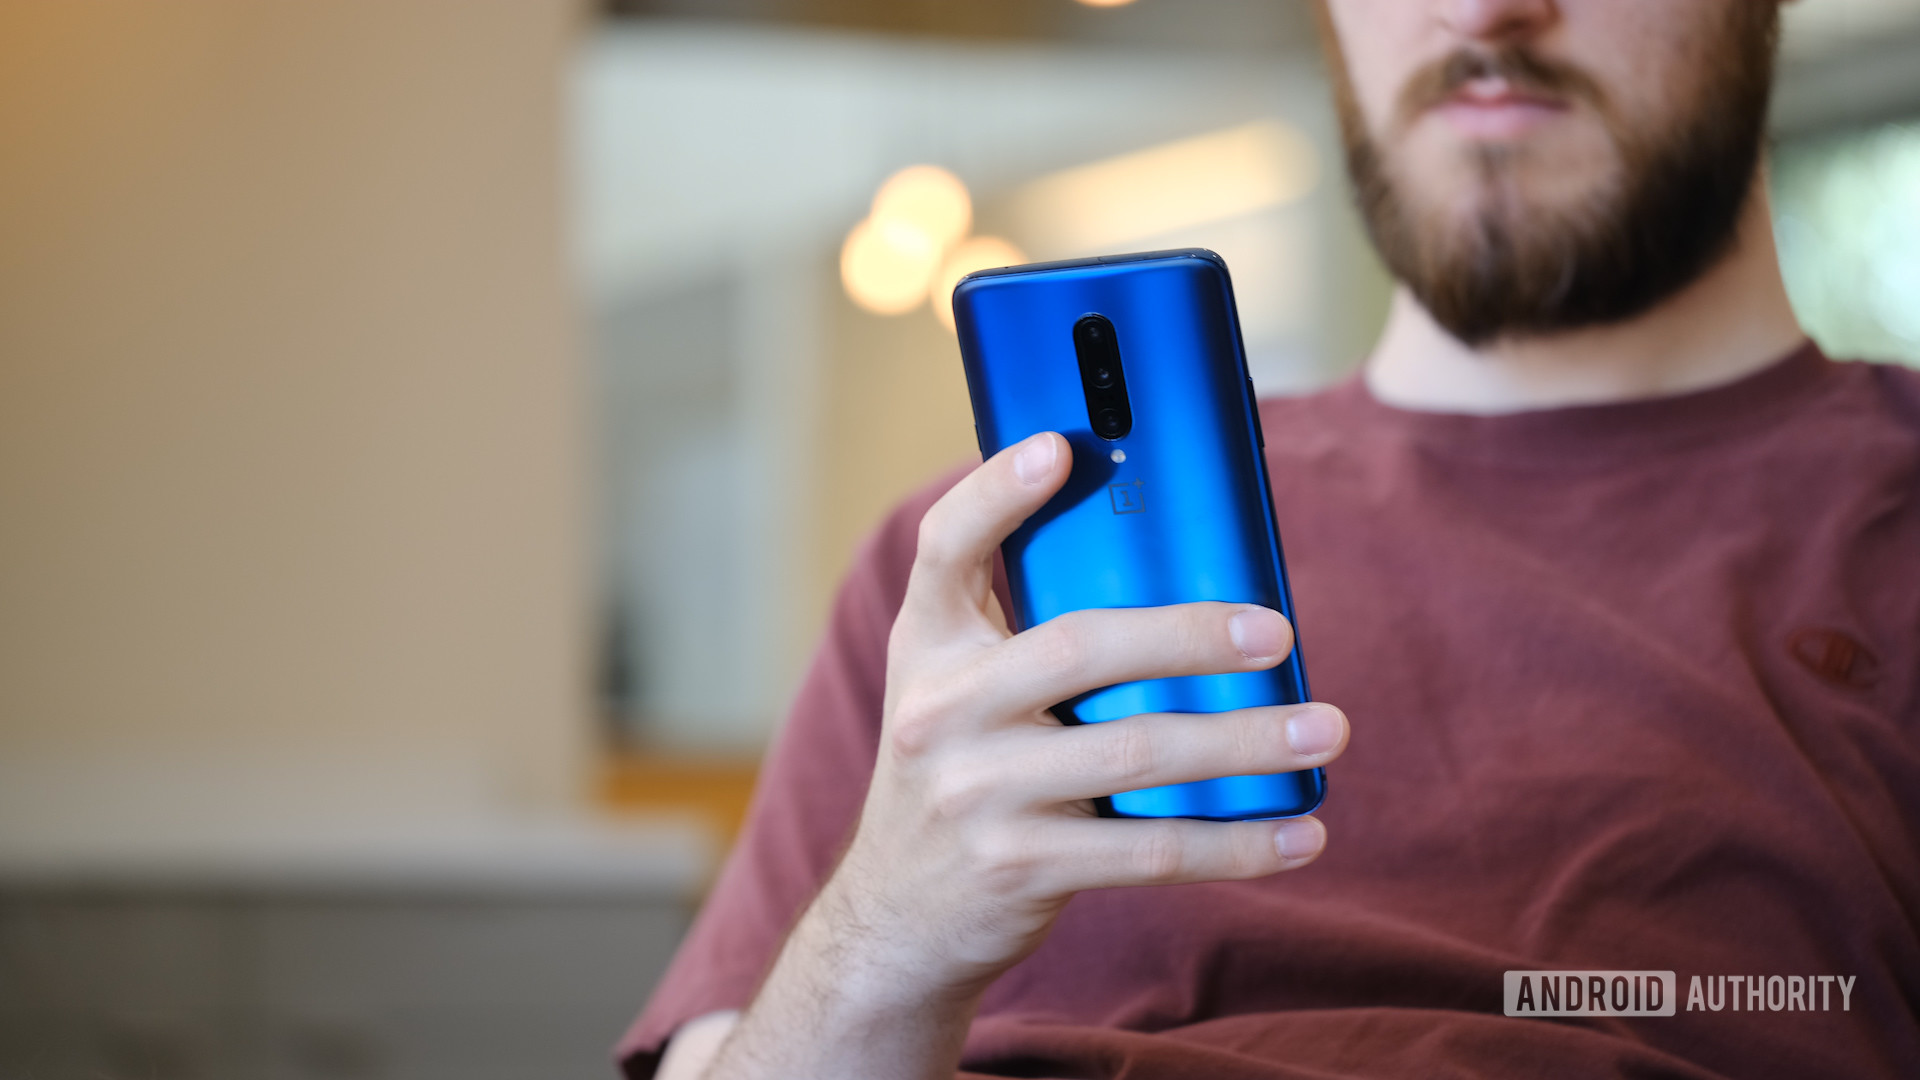 OnePlus 7 Pro in use from behind